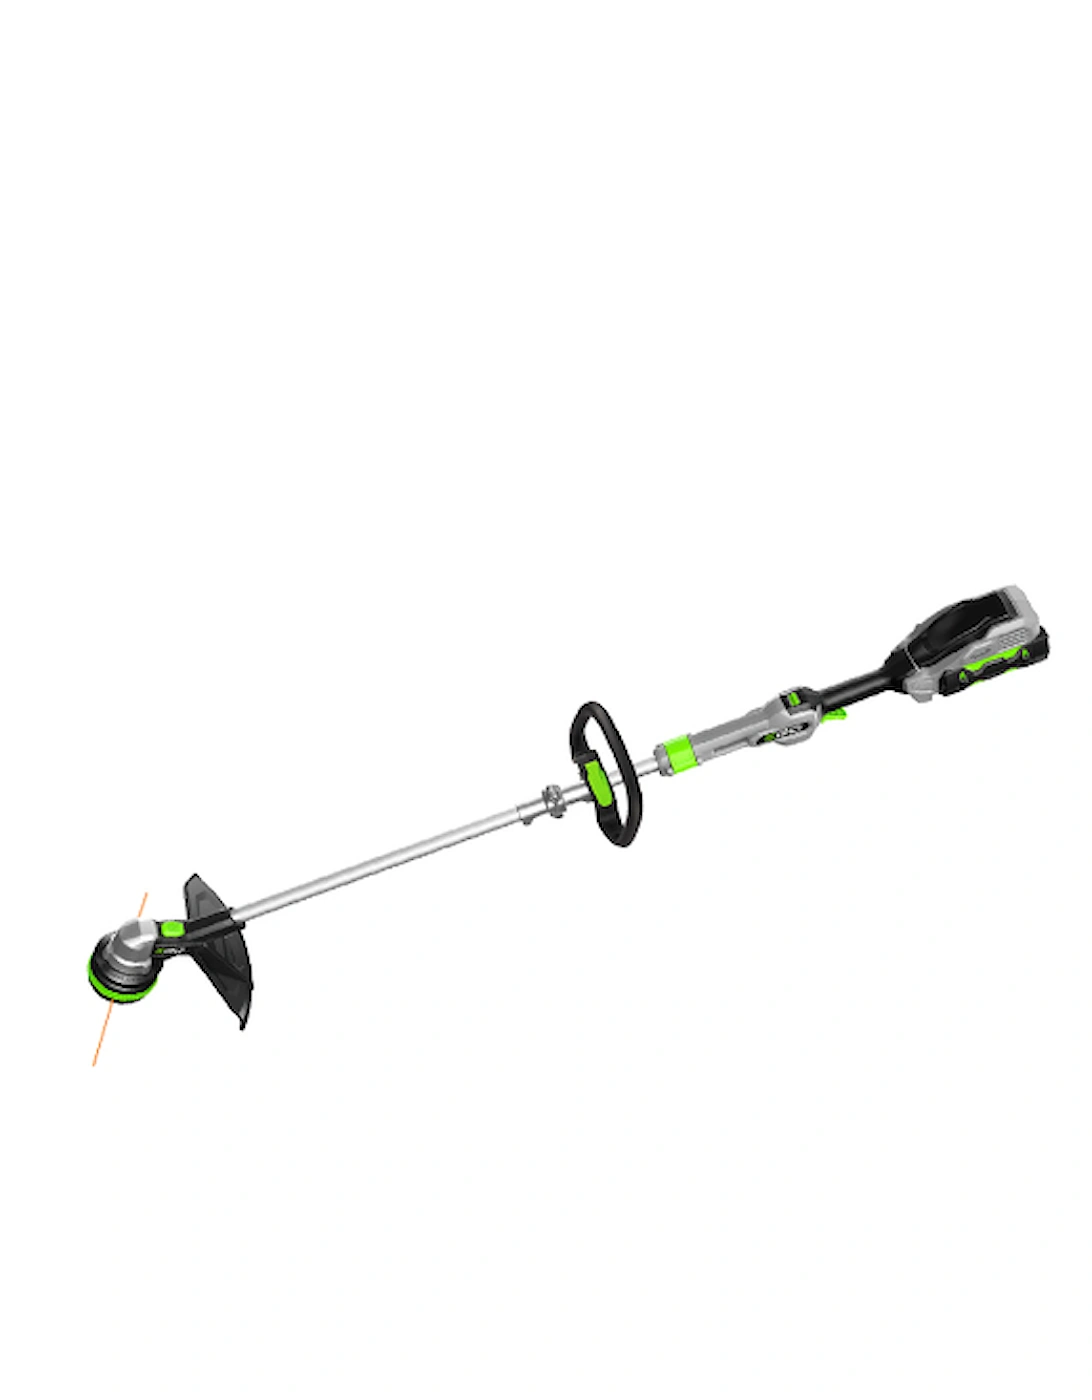 POWER+ ST1401E-ST Grass Trimmer With 2.5Ah Battery + Std Charger, 6 of 5